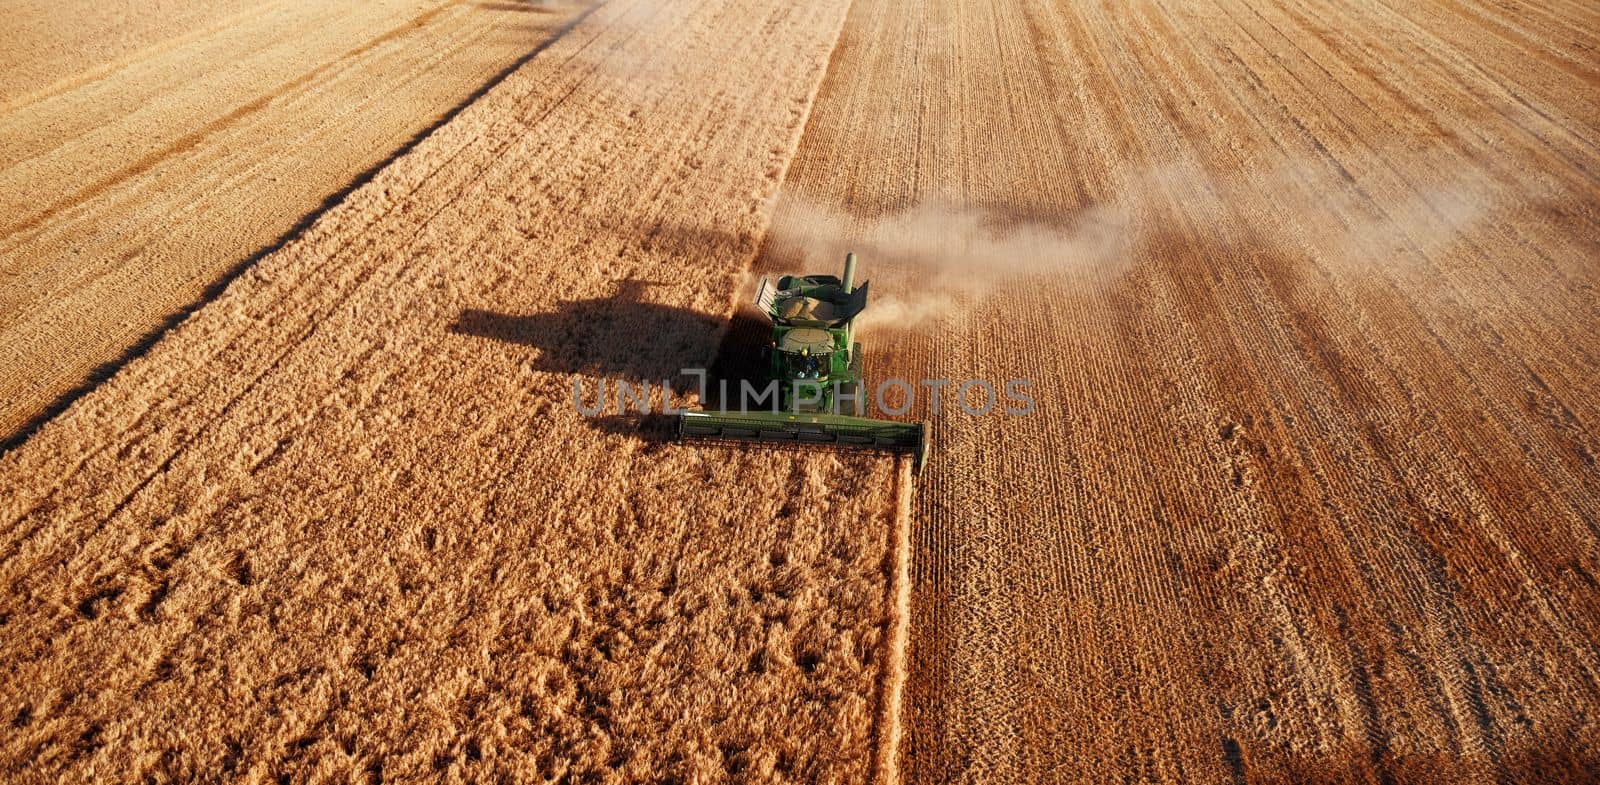 Harvester works in the field. Combine Harvesting Wheat, top view of a wheatfield. Field field of cereals during harvesting by EvgeniyQW